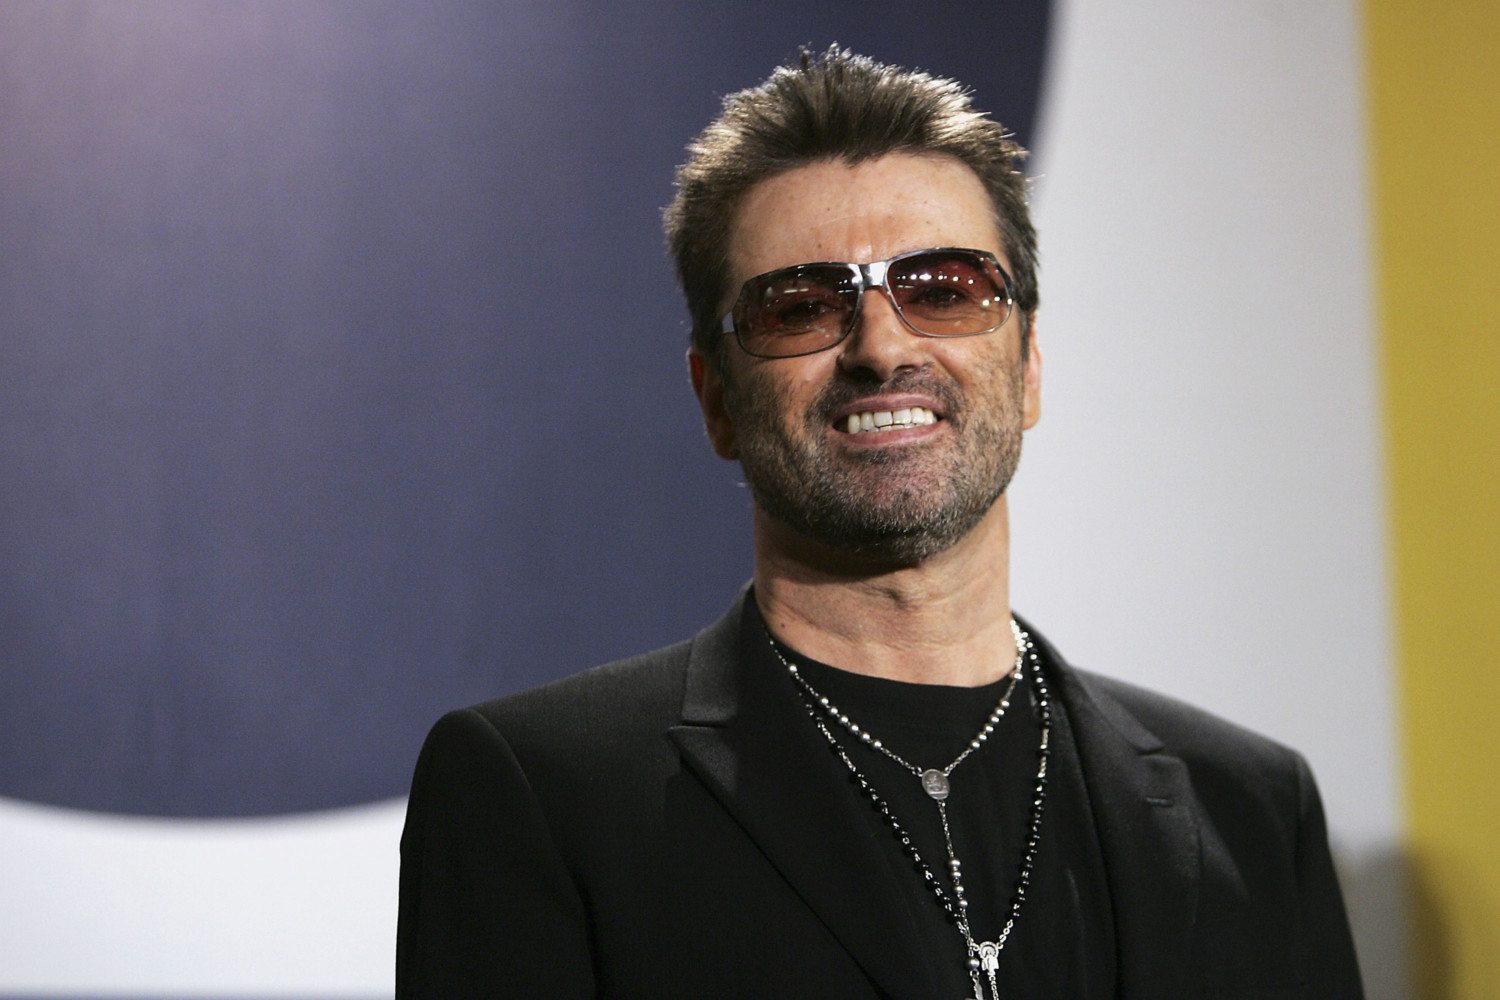 Berlinale: 'George Michael: A Different Story' Photocall And Press Conference